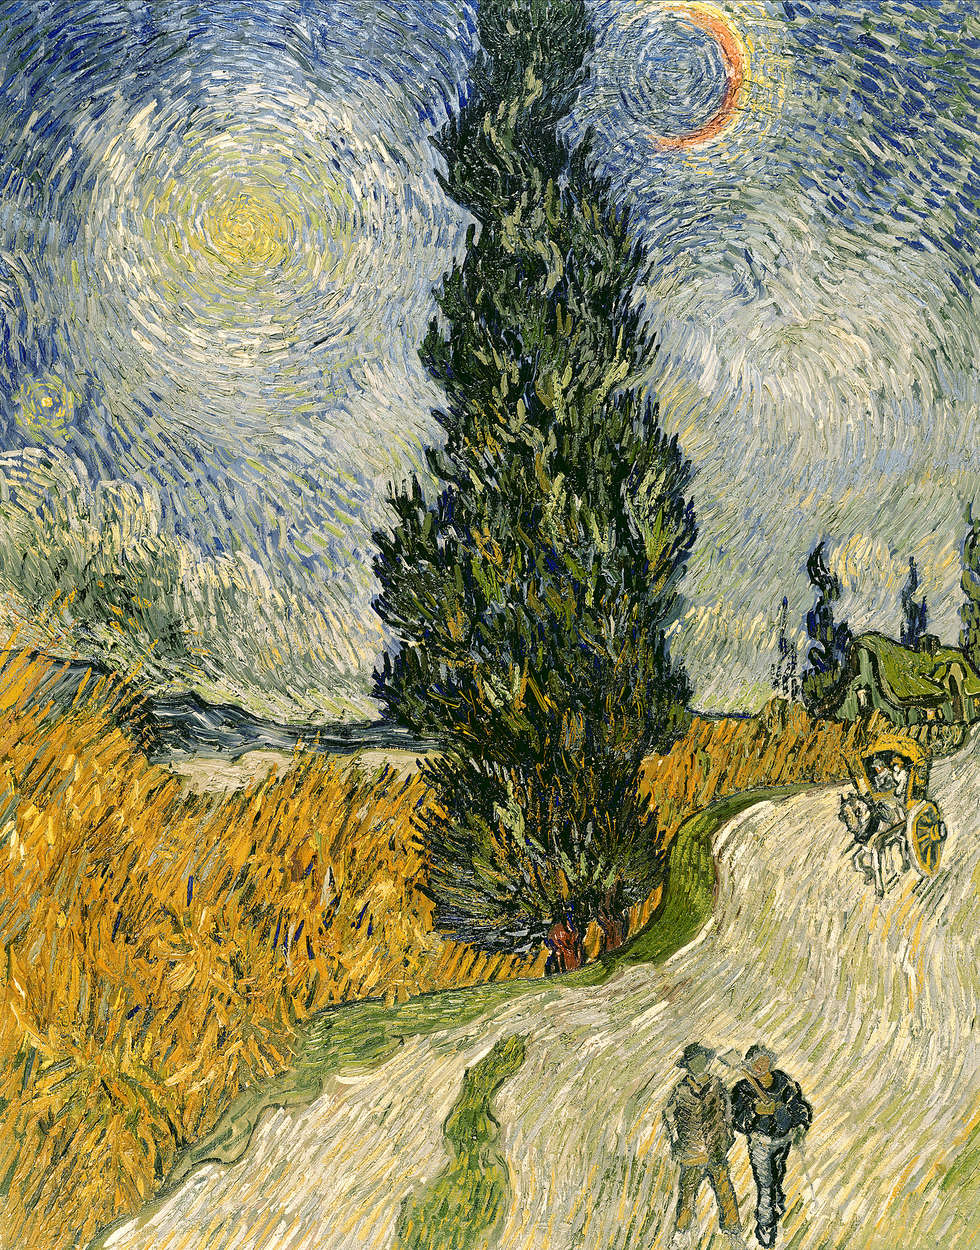             Photo wallpaper "Street with cypresses and star" by Vincent van Gogh
        